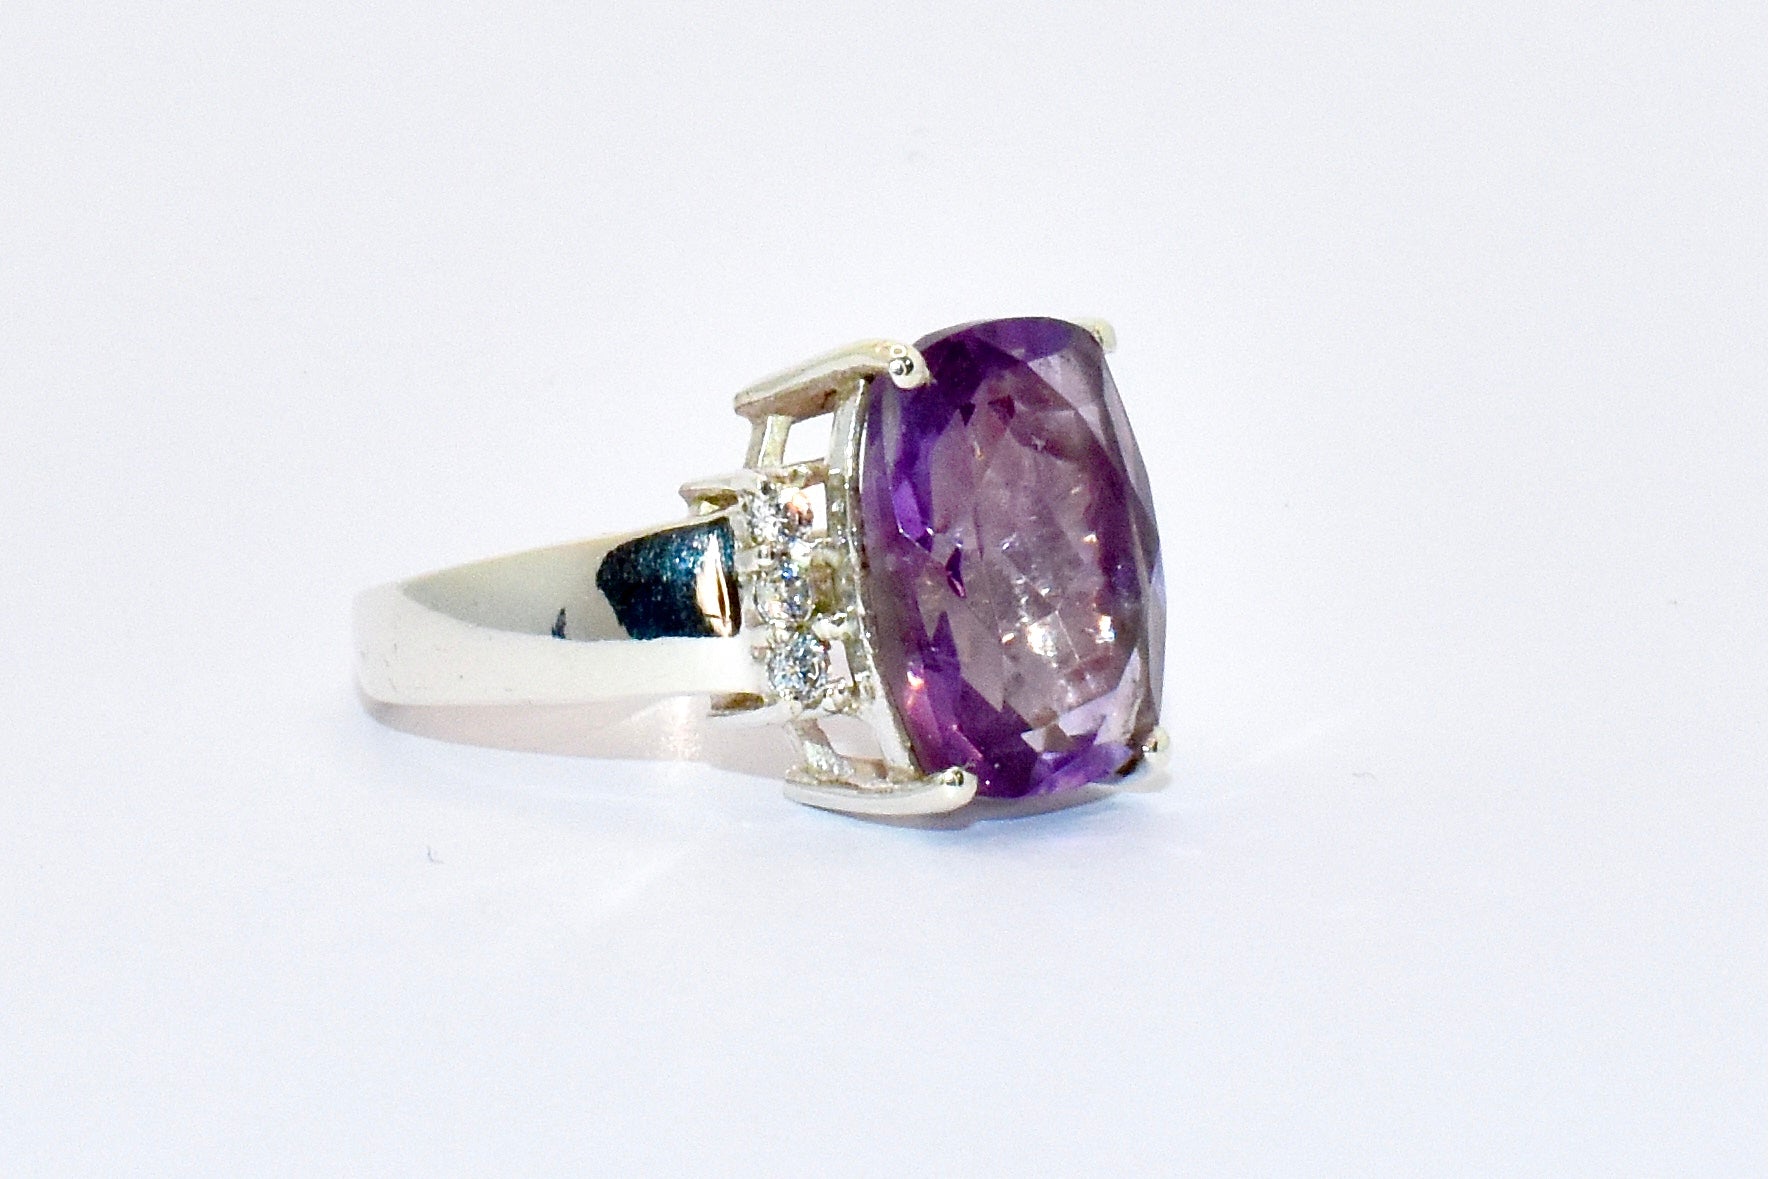 Premium Grade natural Amethyst ring with a vibrant purple colour, set in 925 silver.